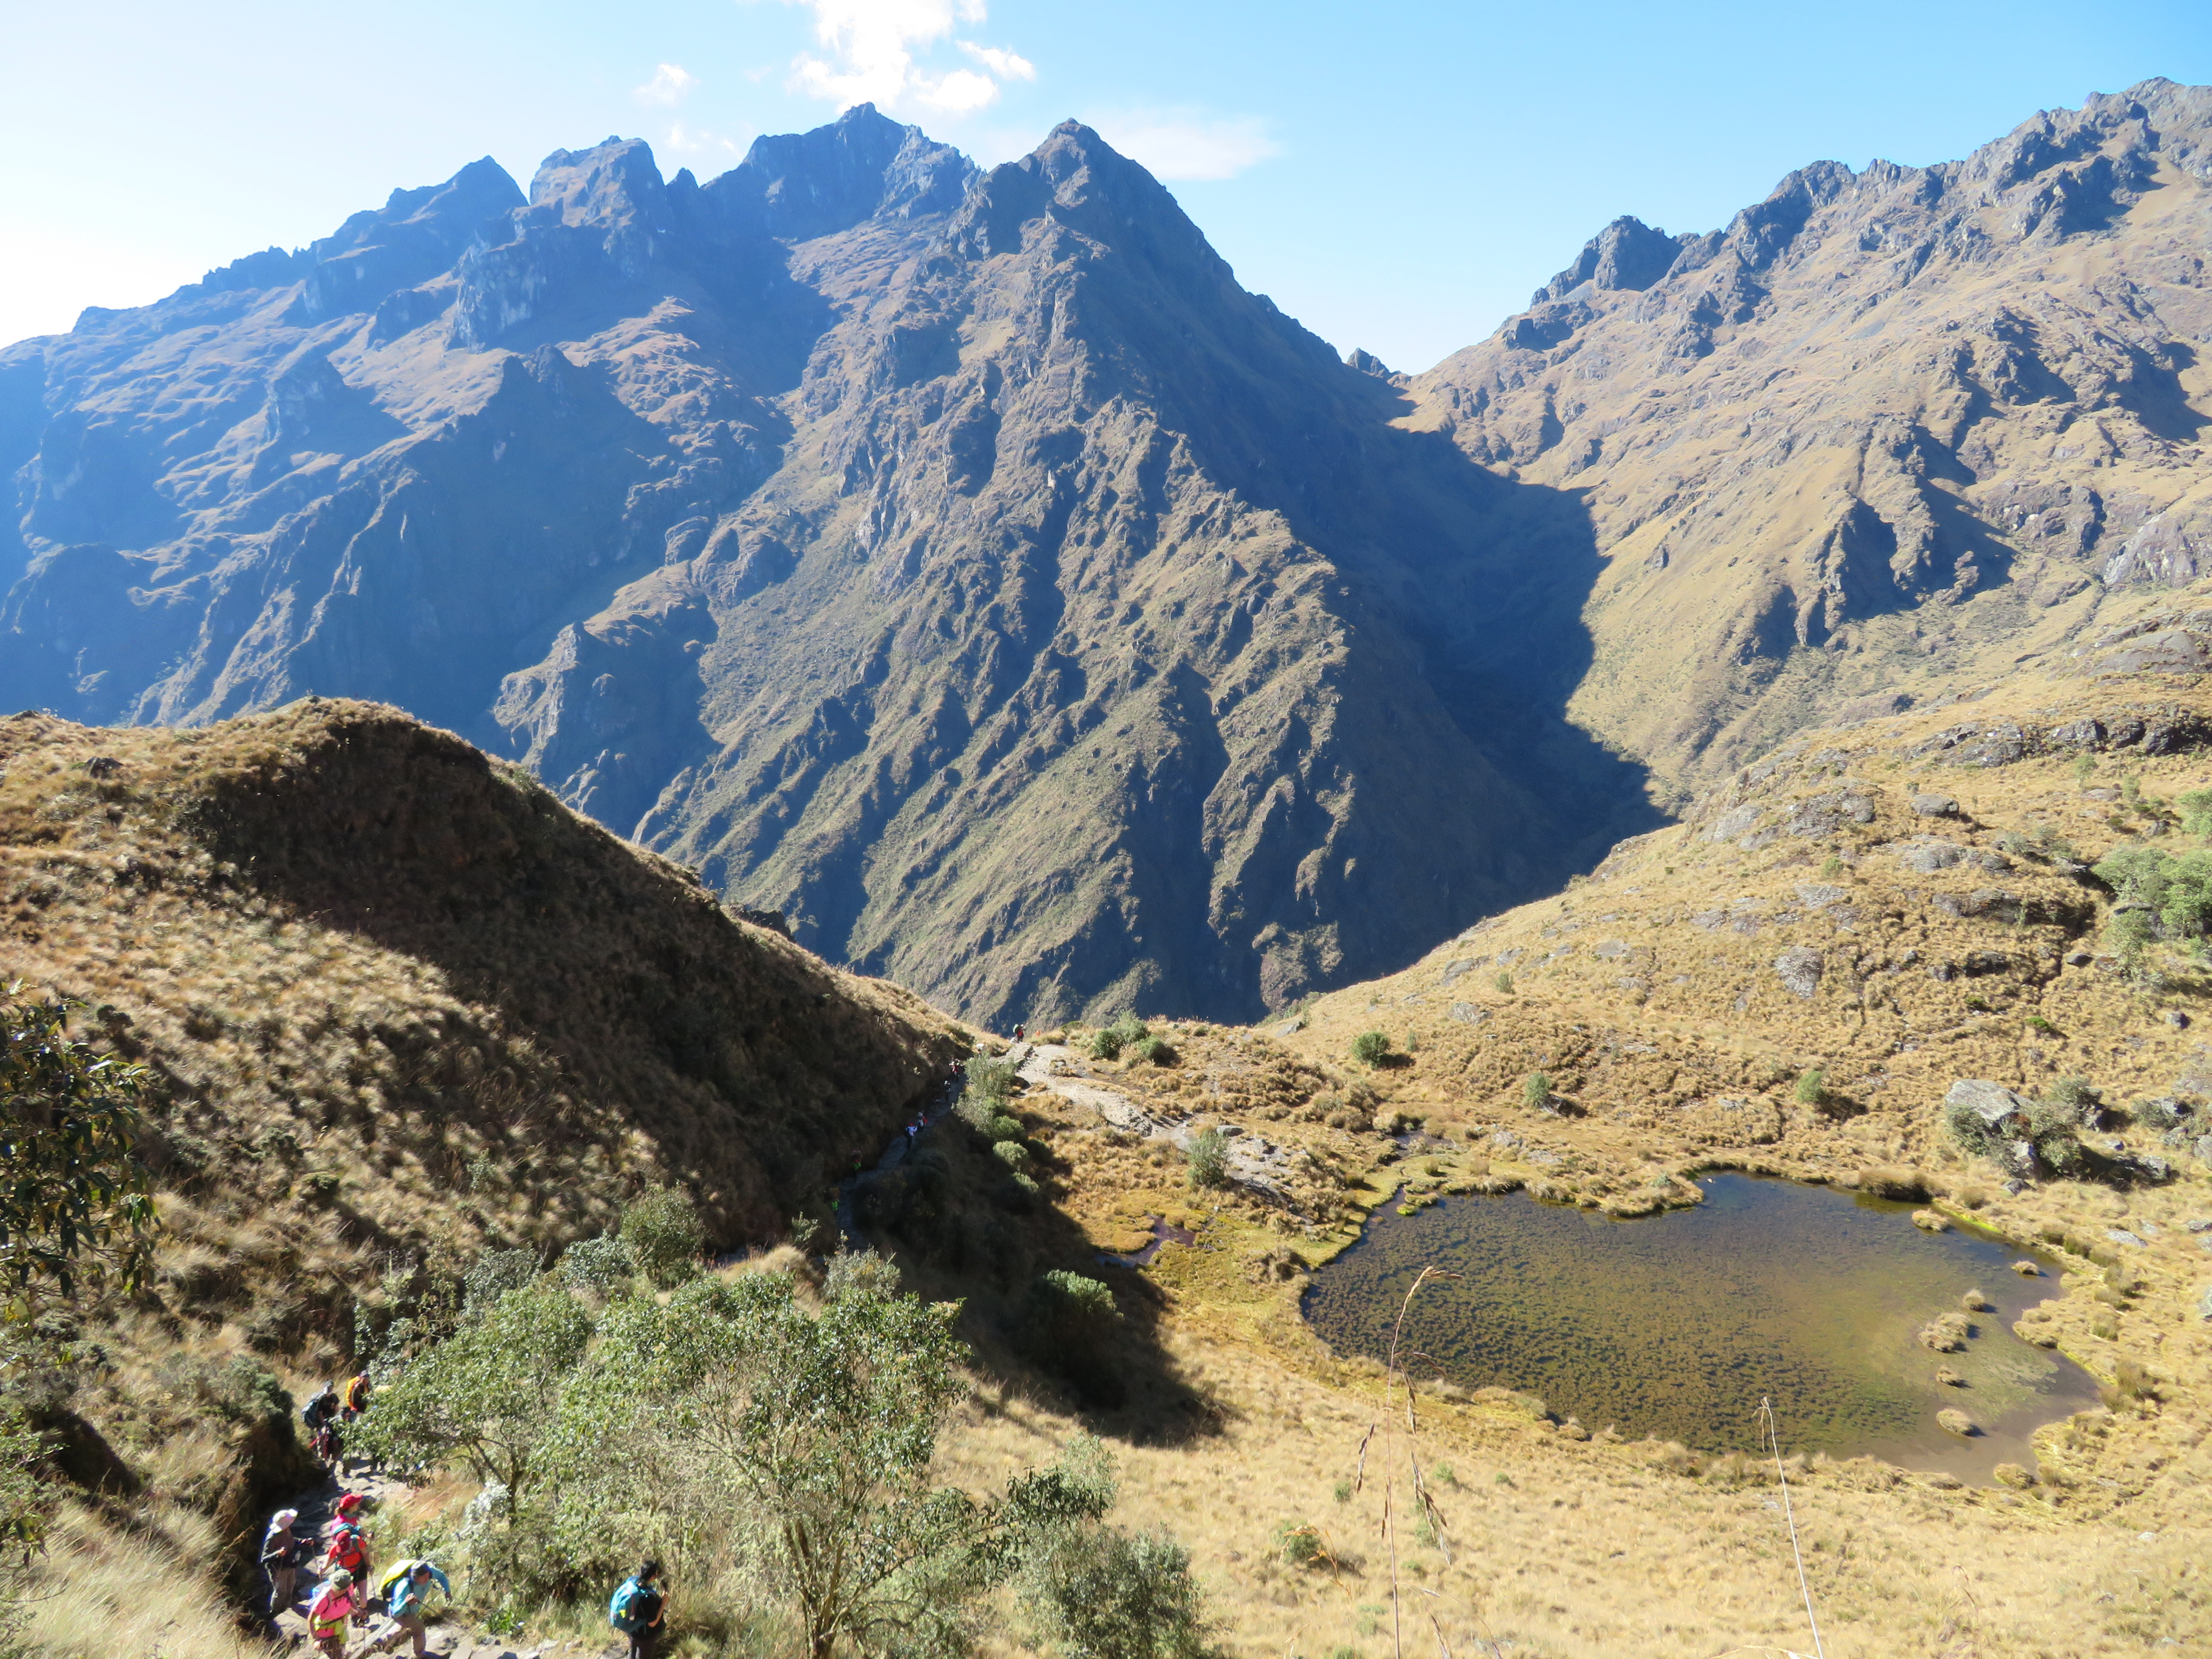 All you need to know about trekking the Inca Trail to Machu Picchu